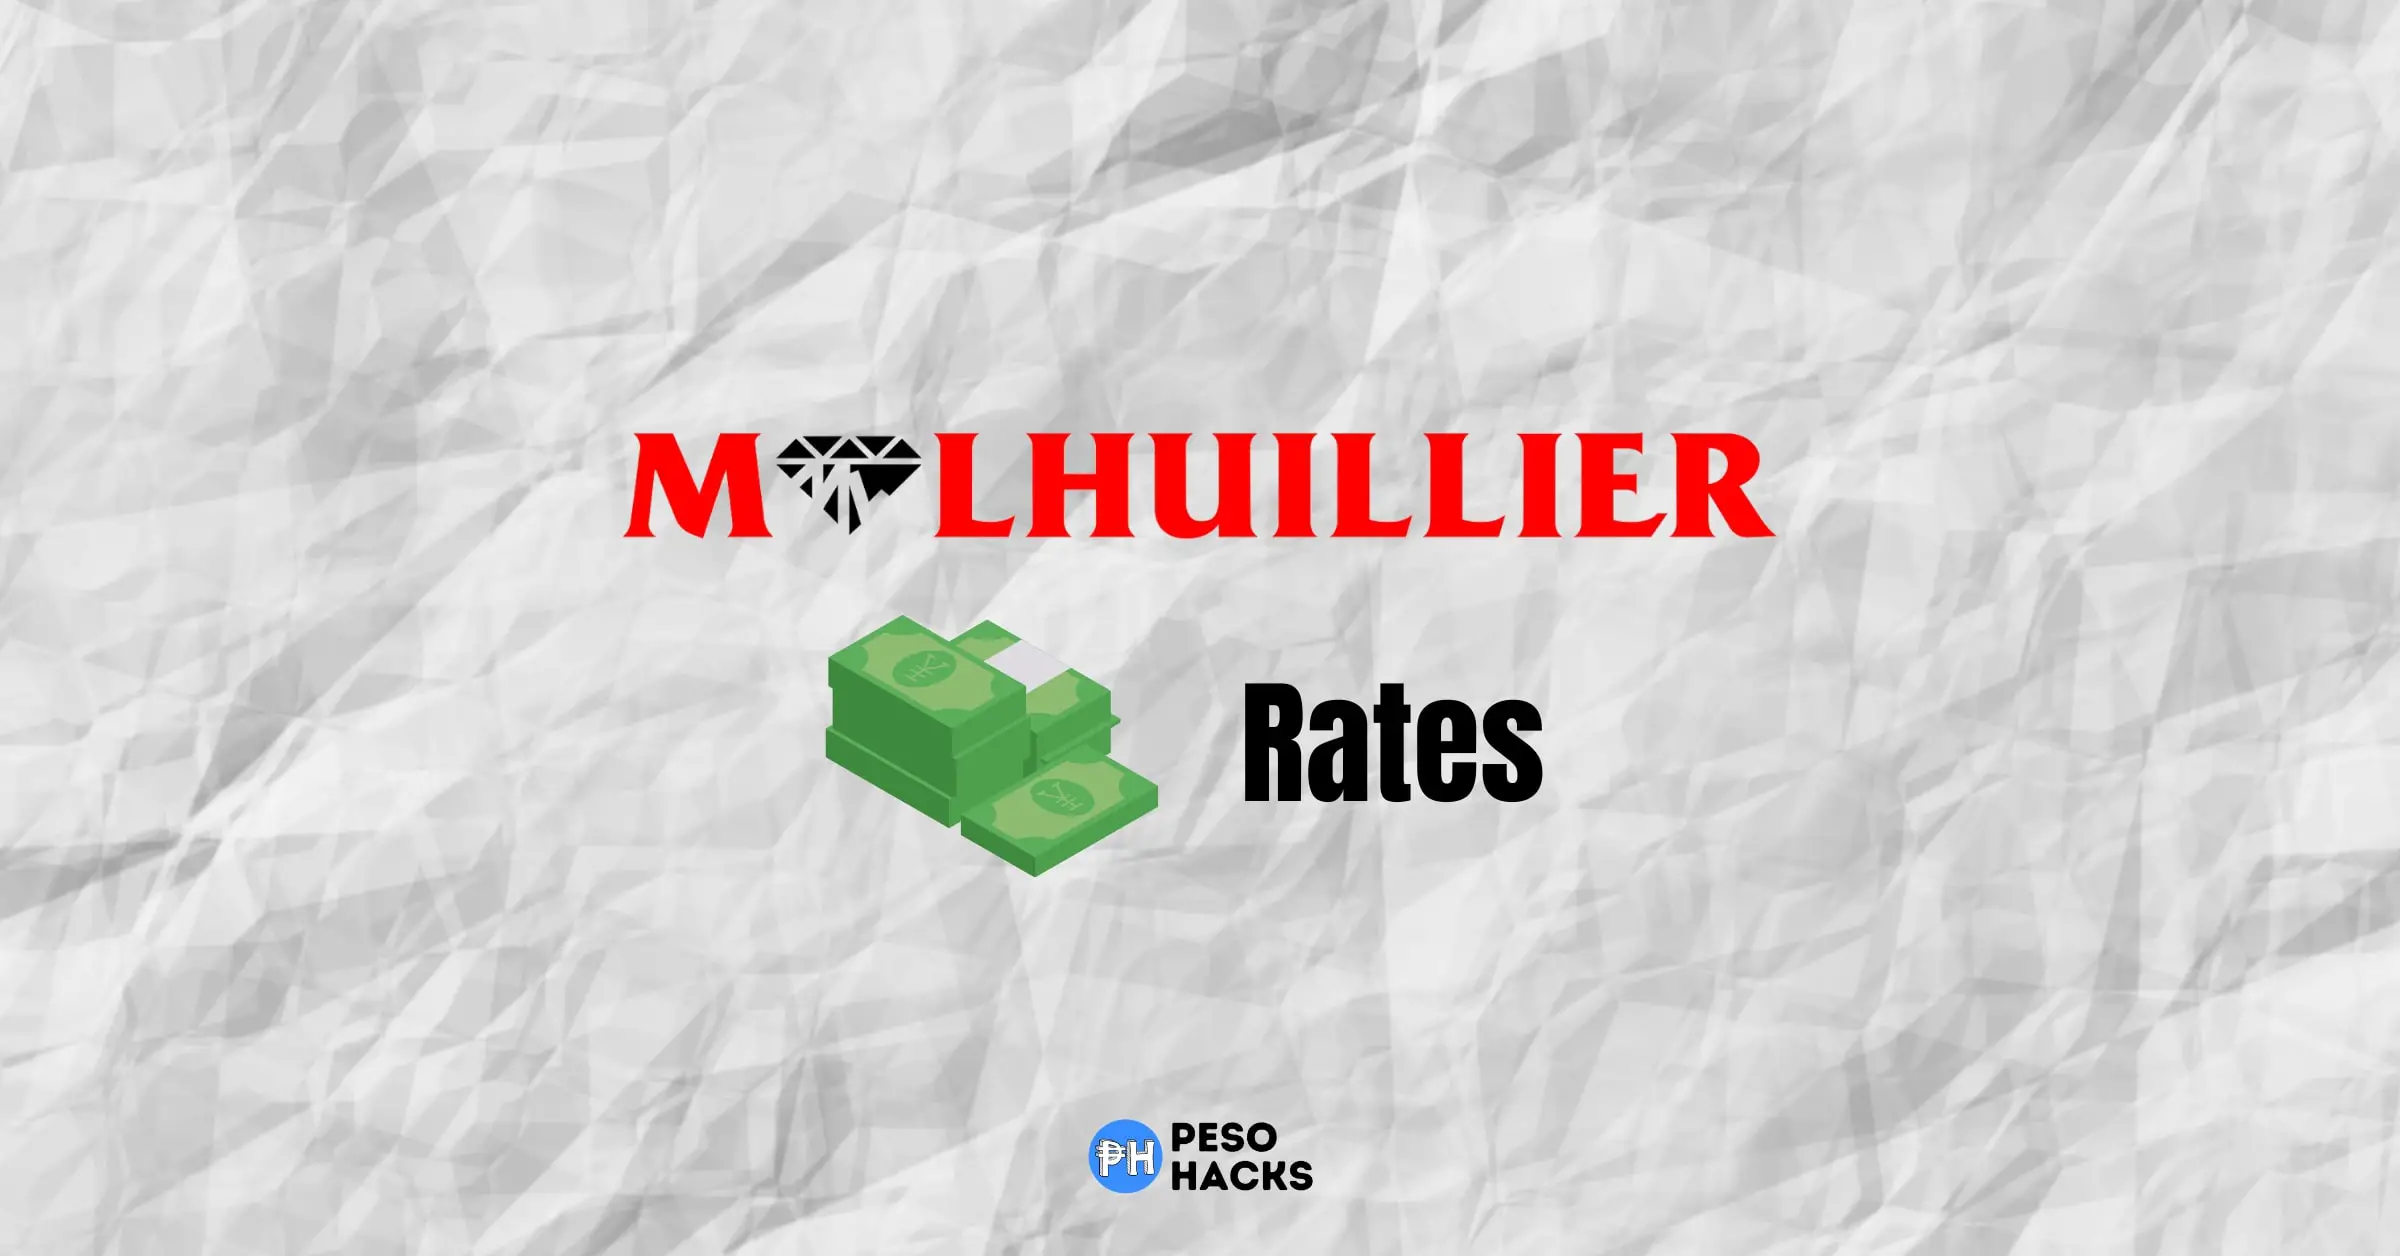 MLhuillier Rates